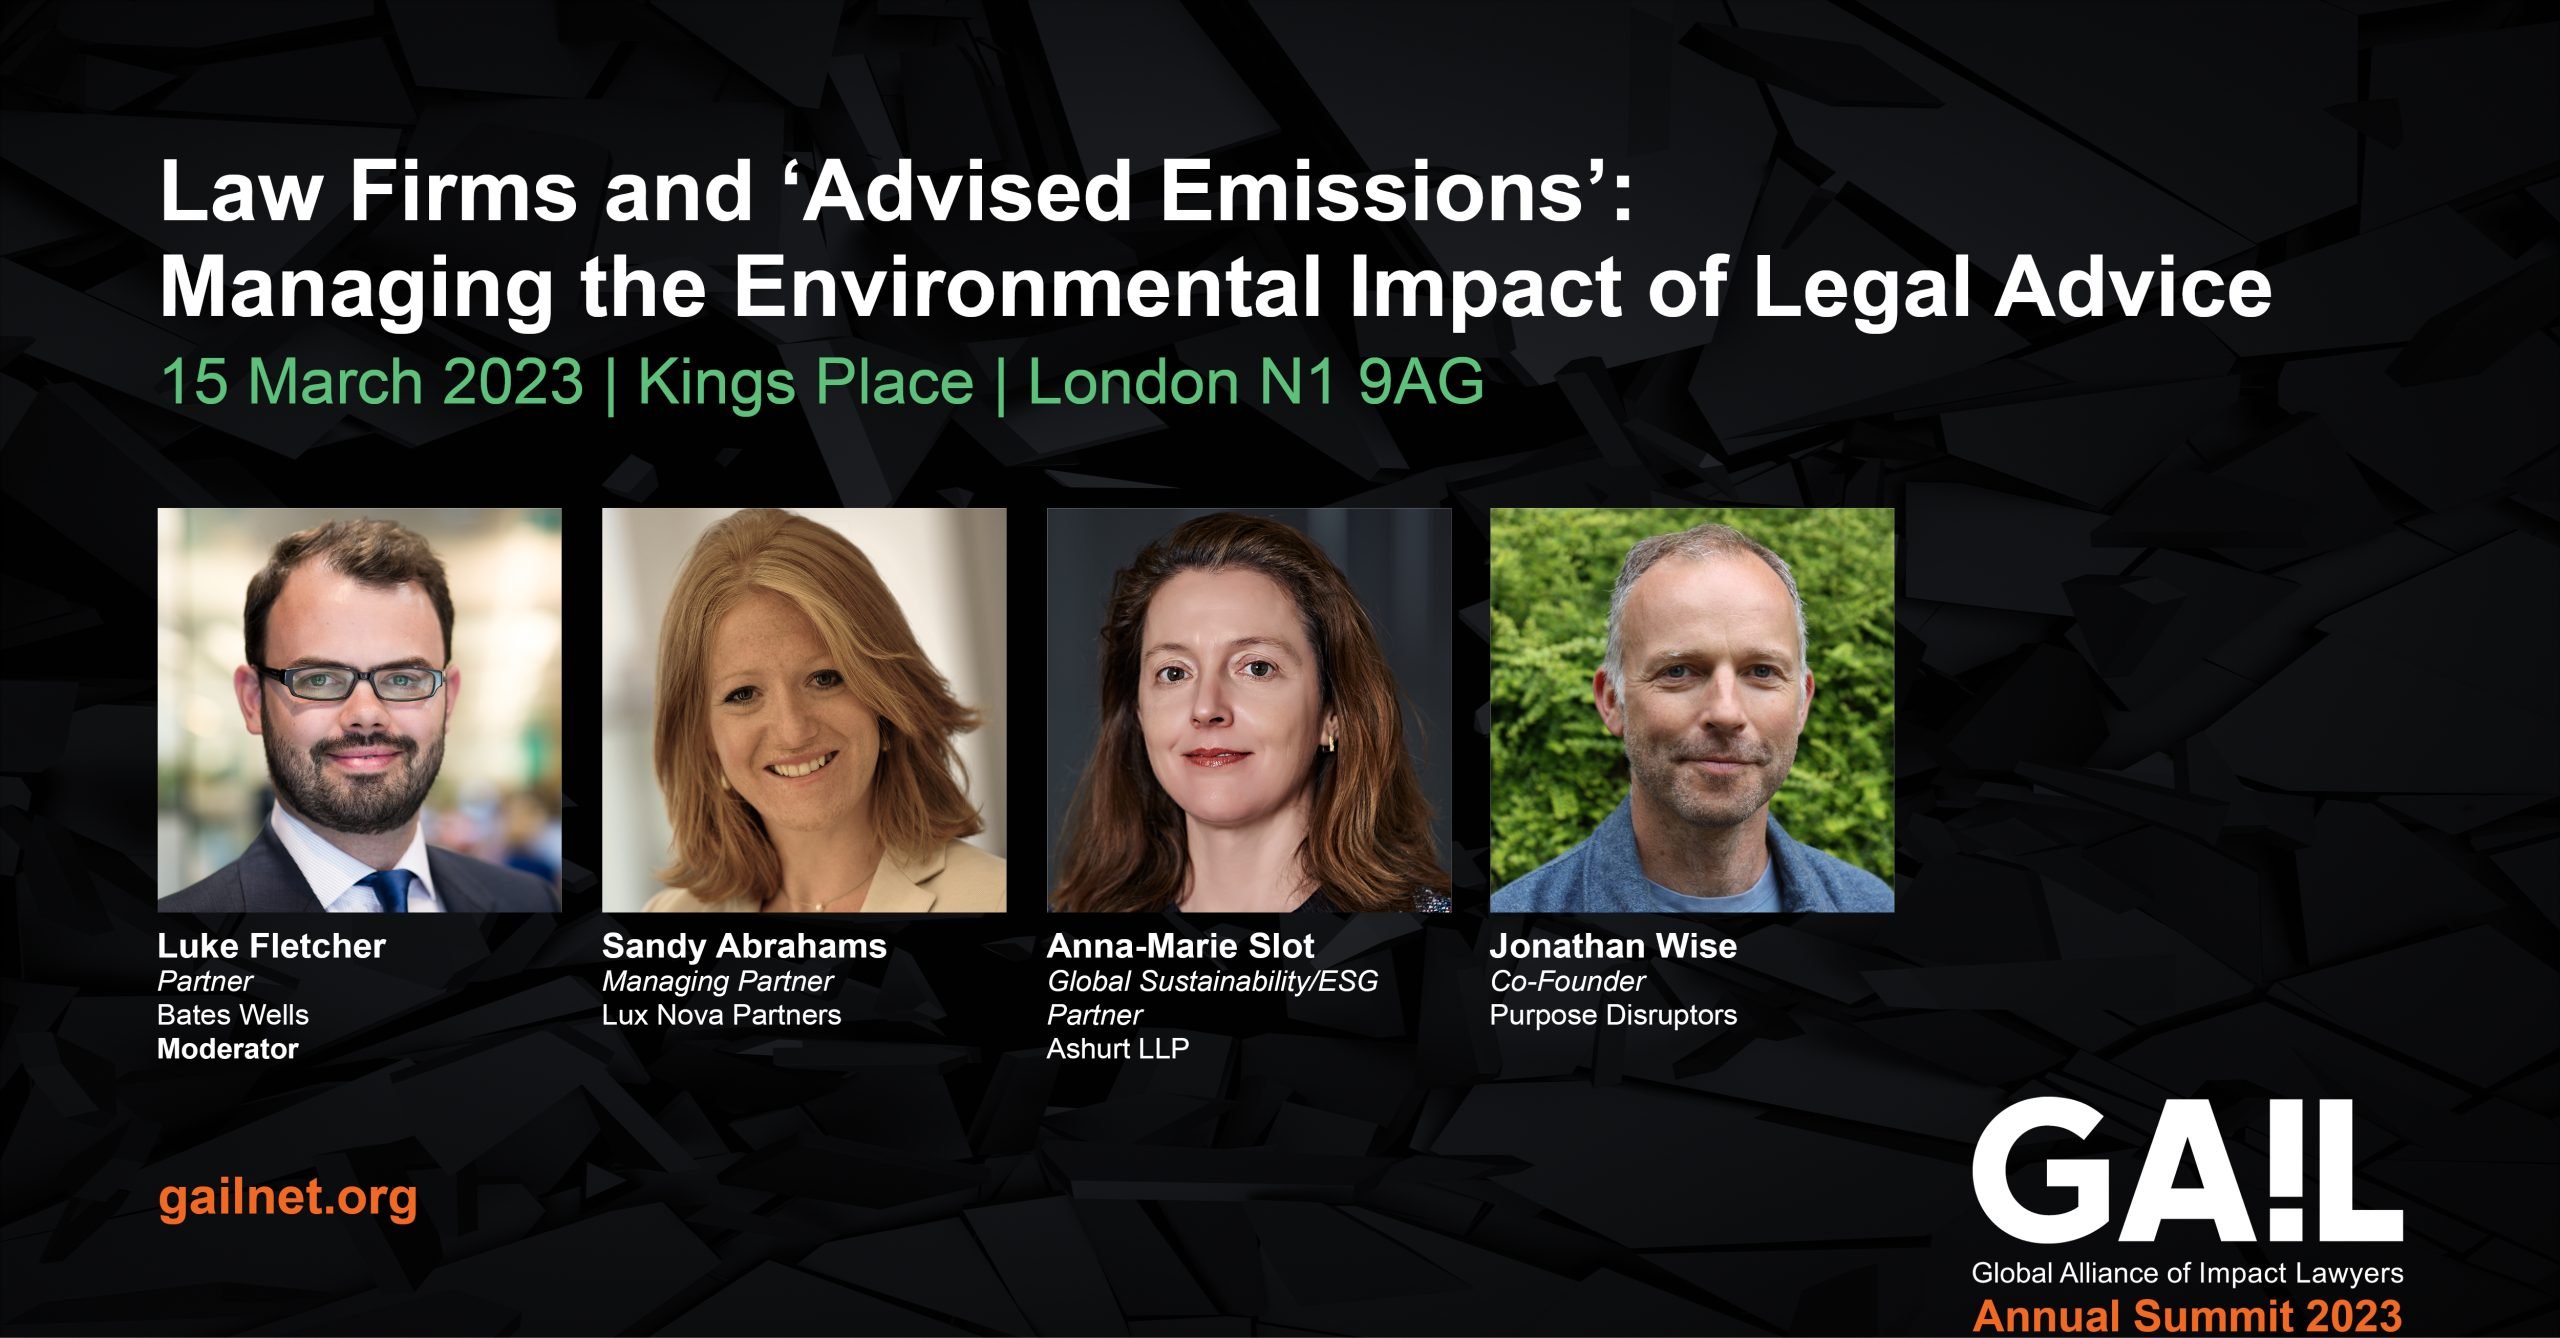 Law Firms and Advised Emissions: Managing the Environmental Impact of Legal Advice